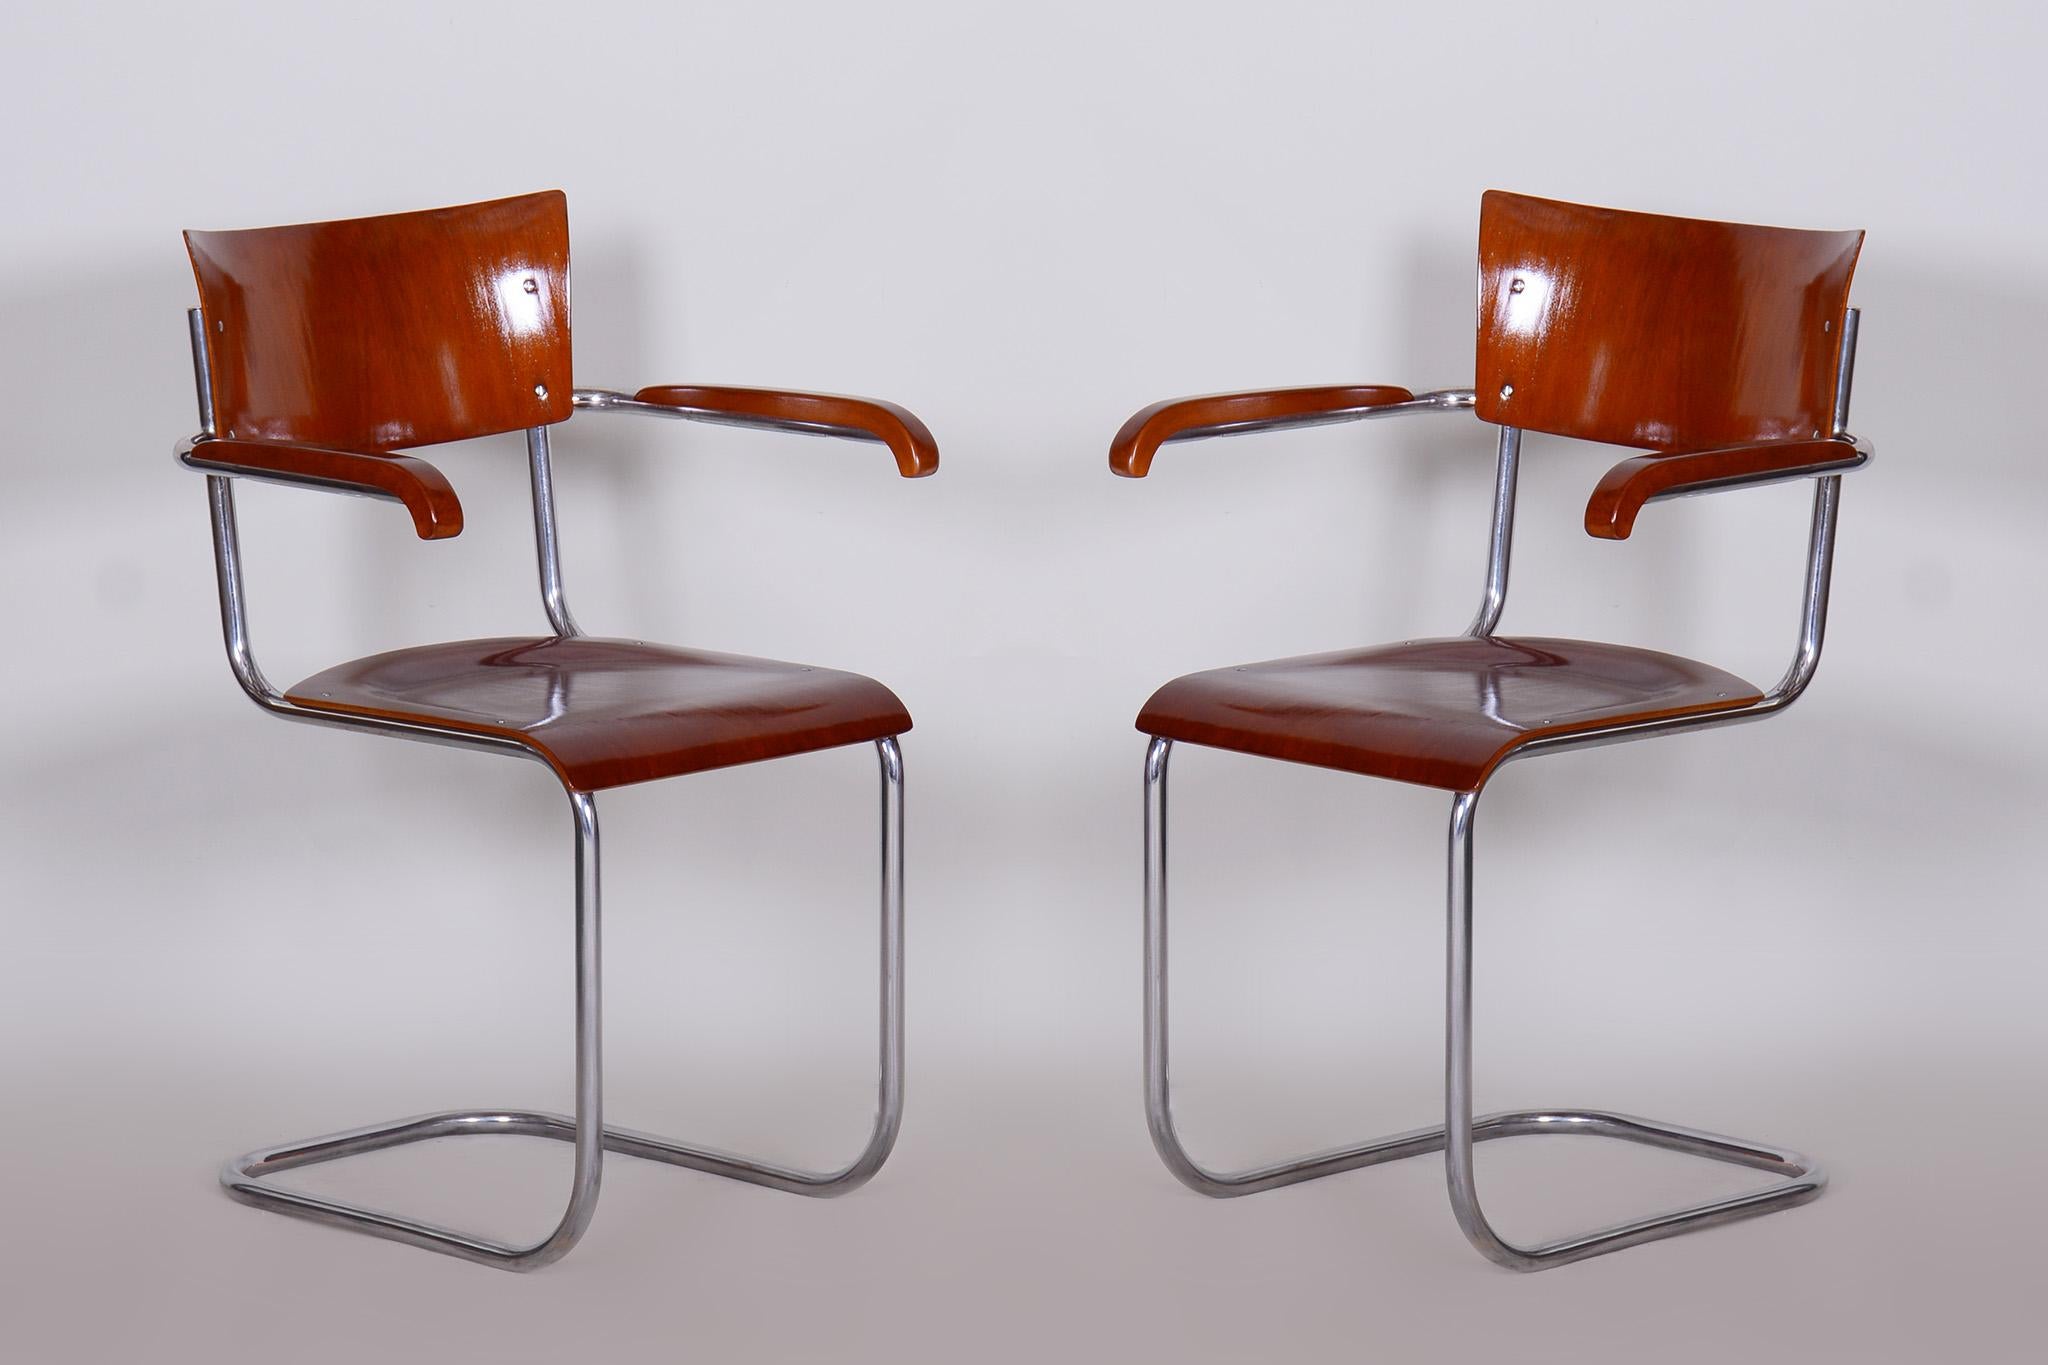 Set of 4 Restored Bauhaus Beech Plywood Armchairs by Mart Stam, 1930s, Germany For Sale 4